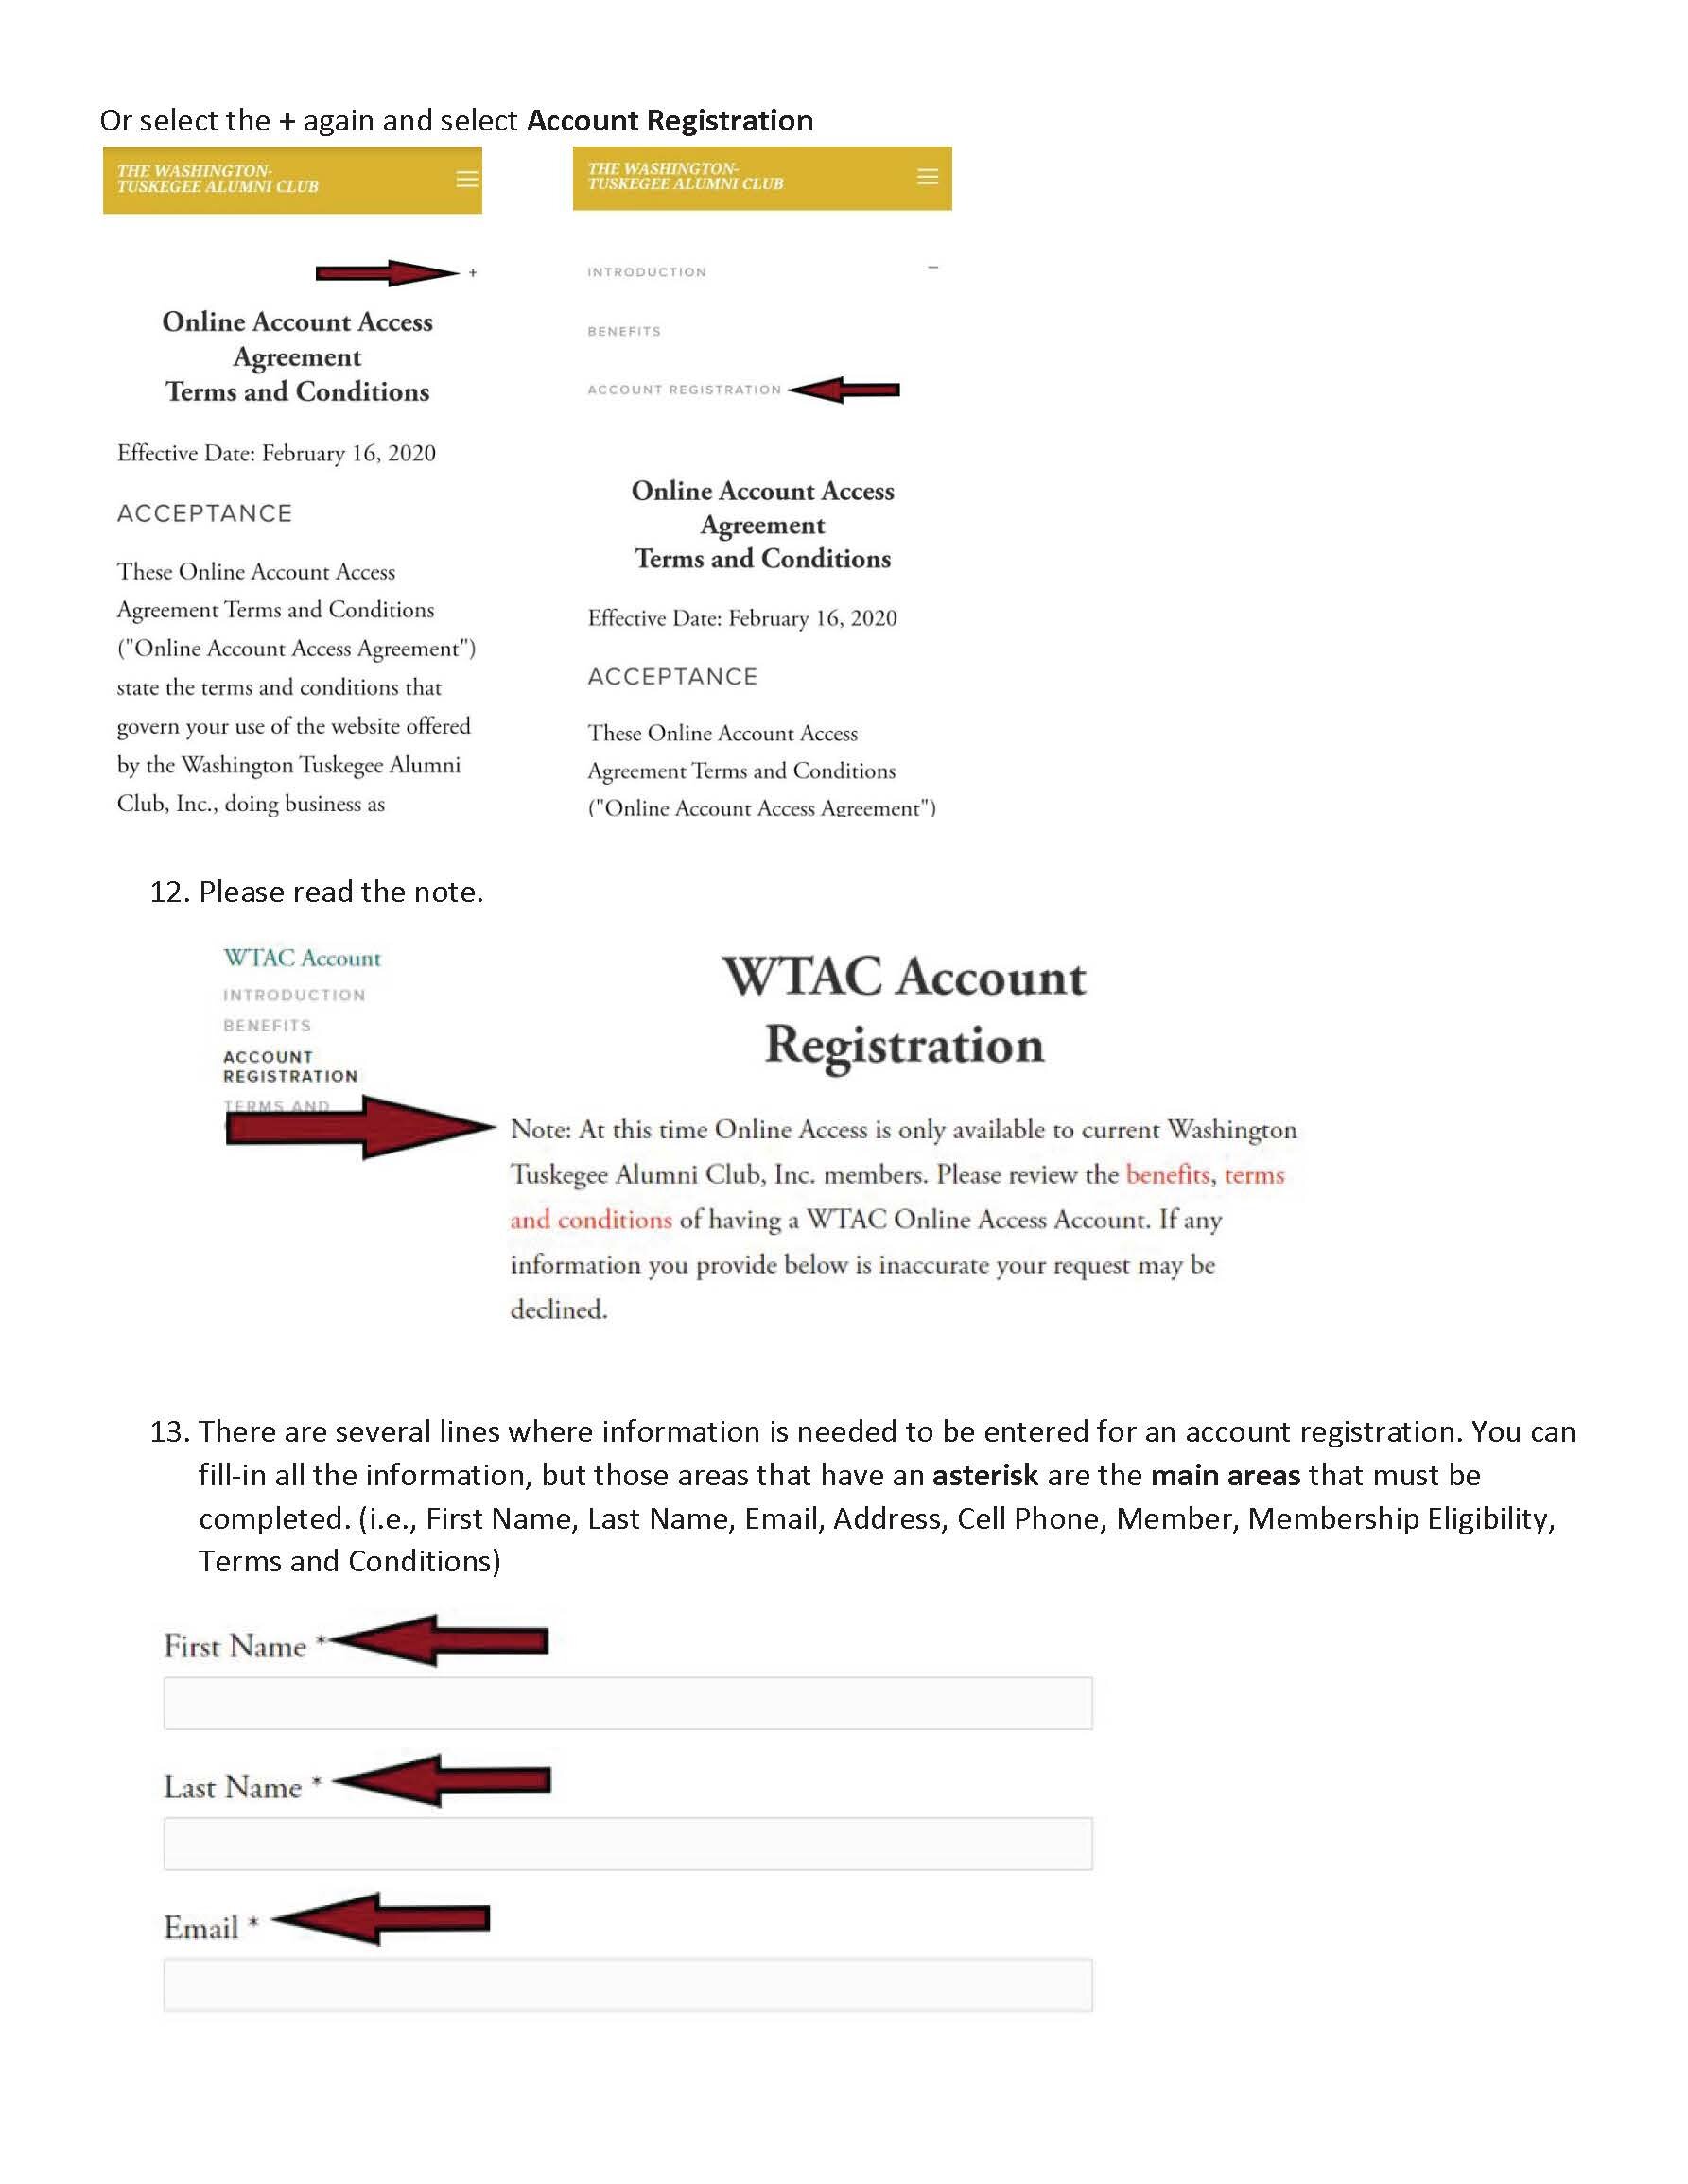 WTAC Account Registration_Page_06.jpg